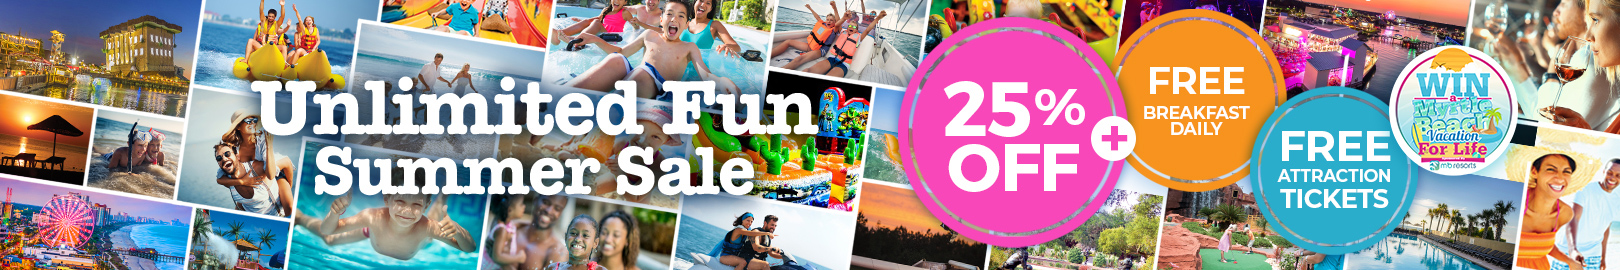 Unlimited Fun Summer Sale - Up to 25% Off + Free Breakfast Daily